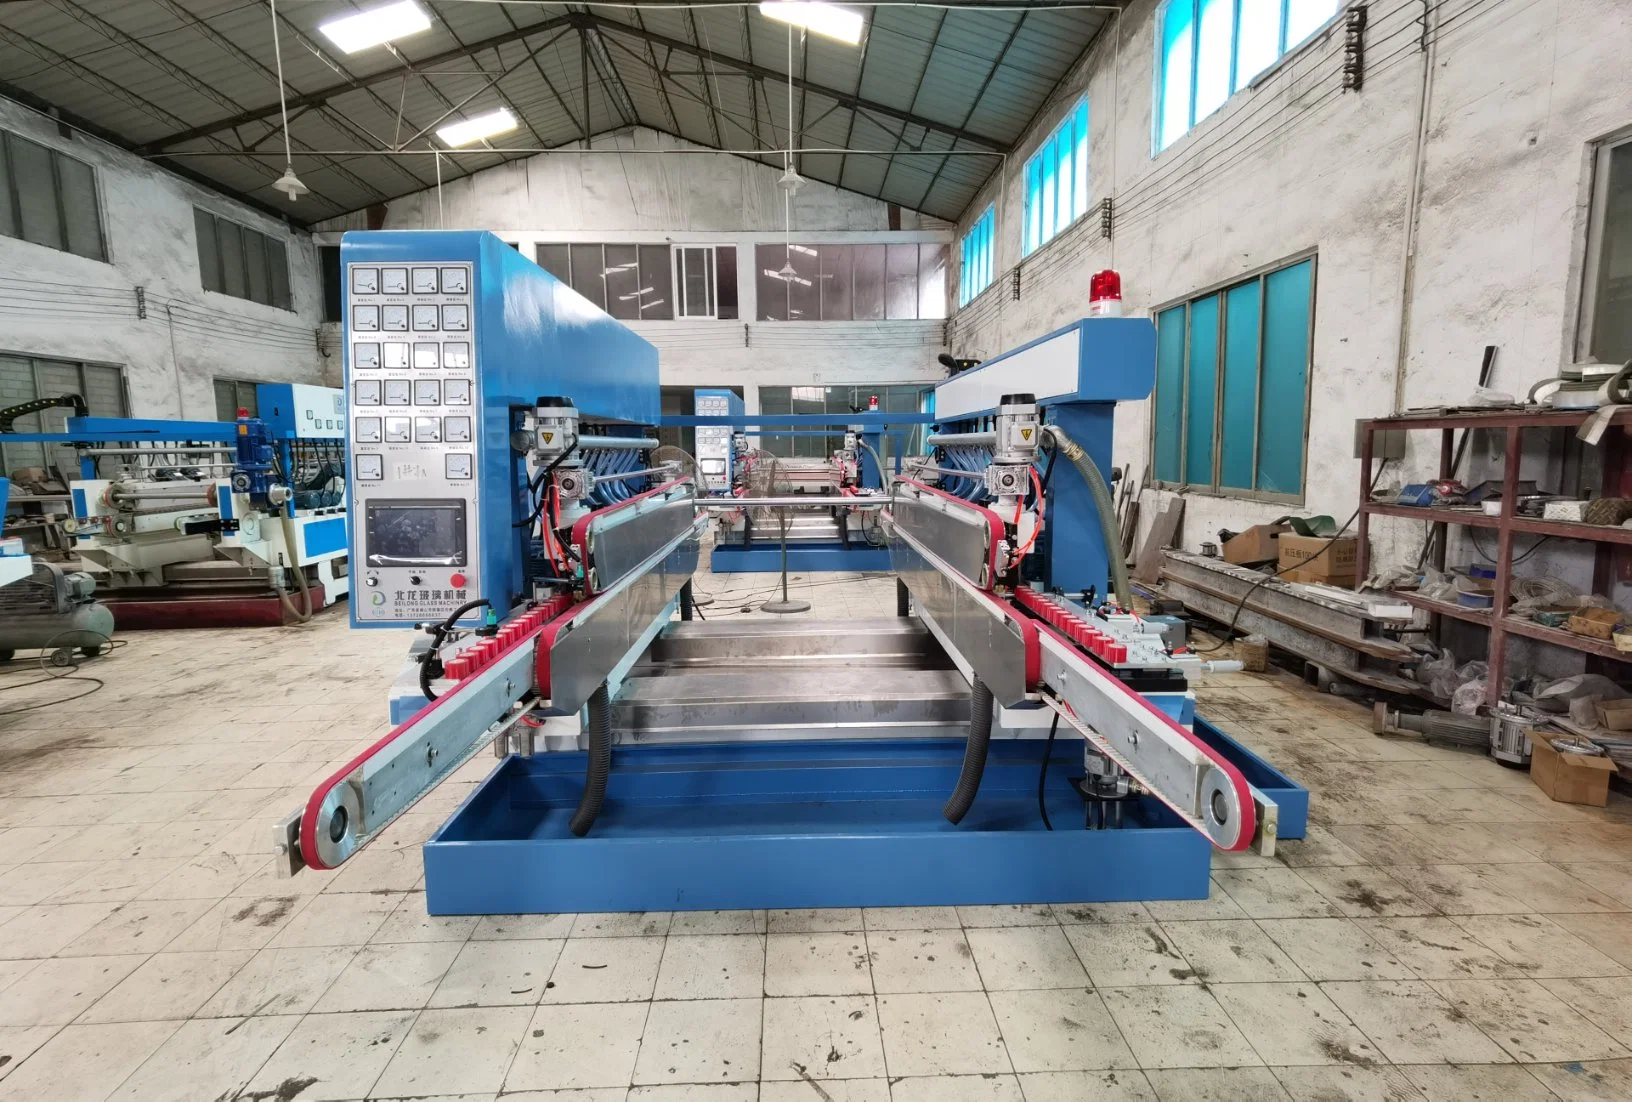 Glass Straight Line Double Edging Machine Processing Line with Washing Machine